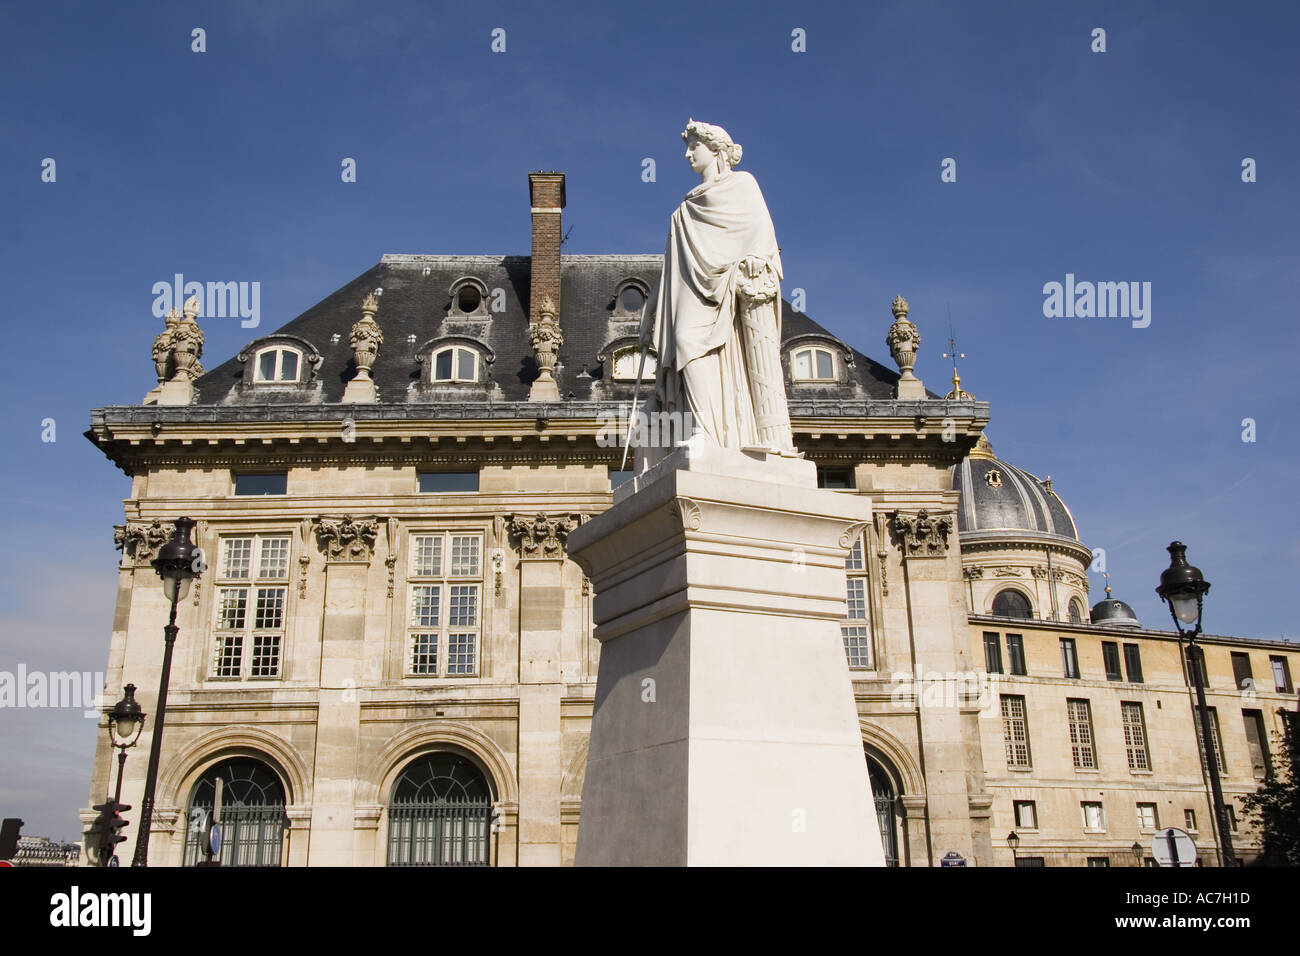 Statue of Jean Francios Soitoux on the Quai Malaquais with the Institut de France in back Paris France Stock Photo